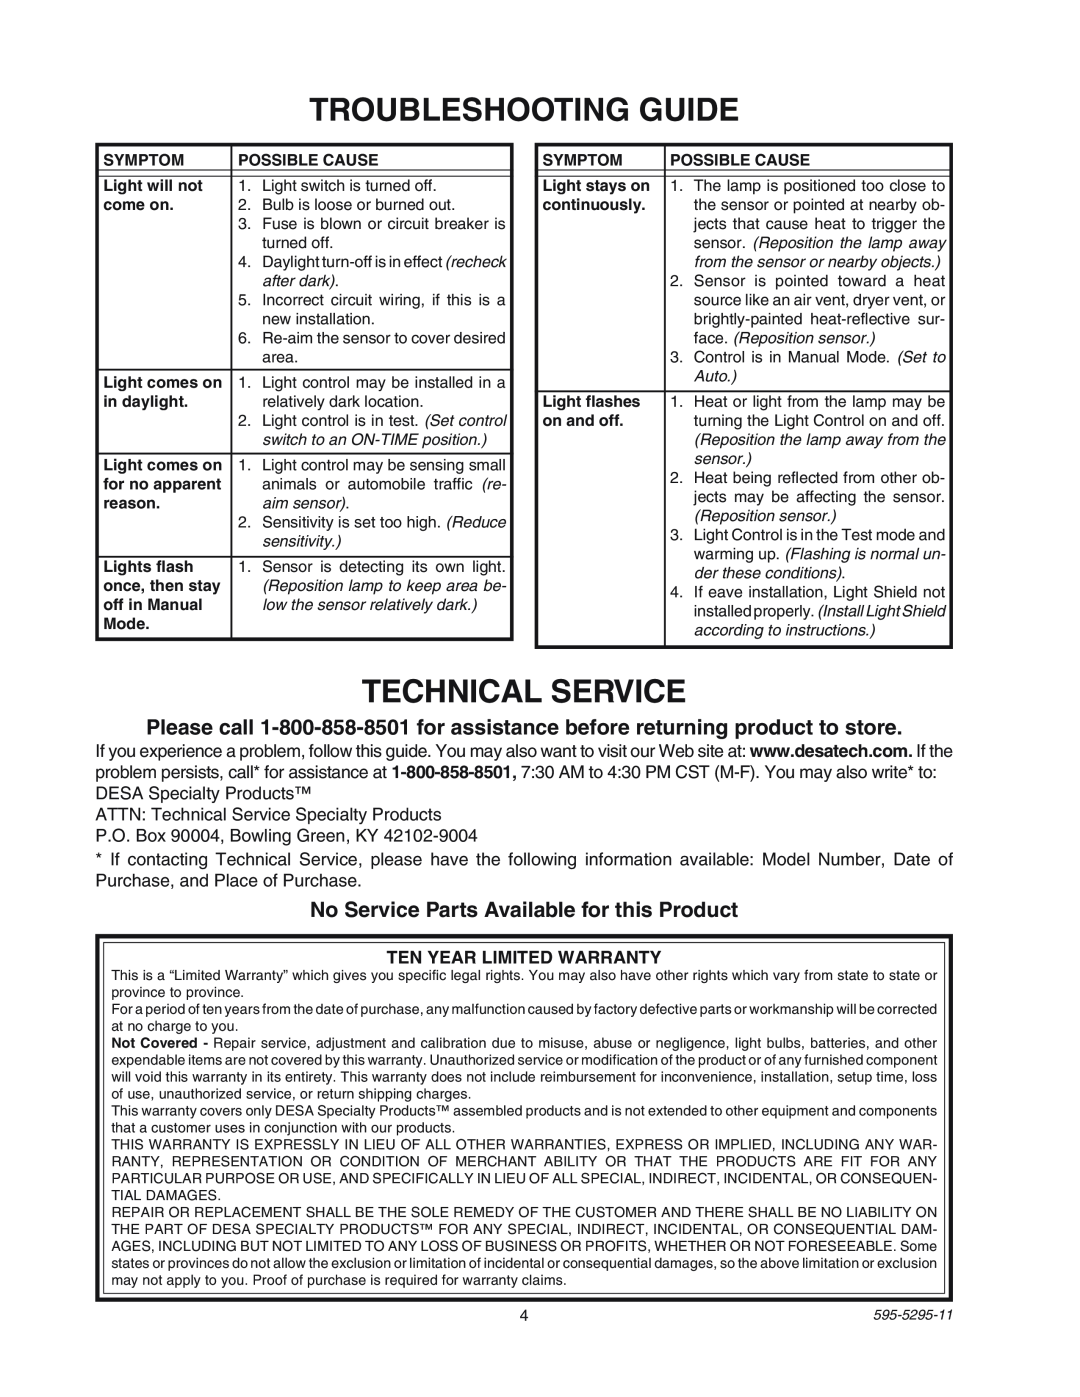 Heath Zenith SL-5525 manual Troubleshooting Guide, Technical Service, No Service Parts Available for this Product 